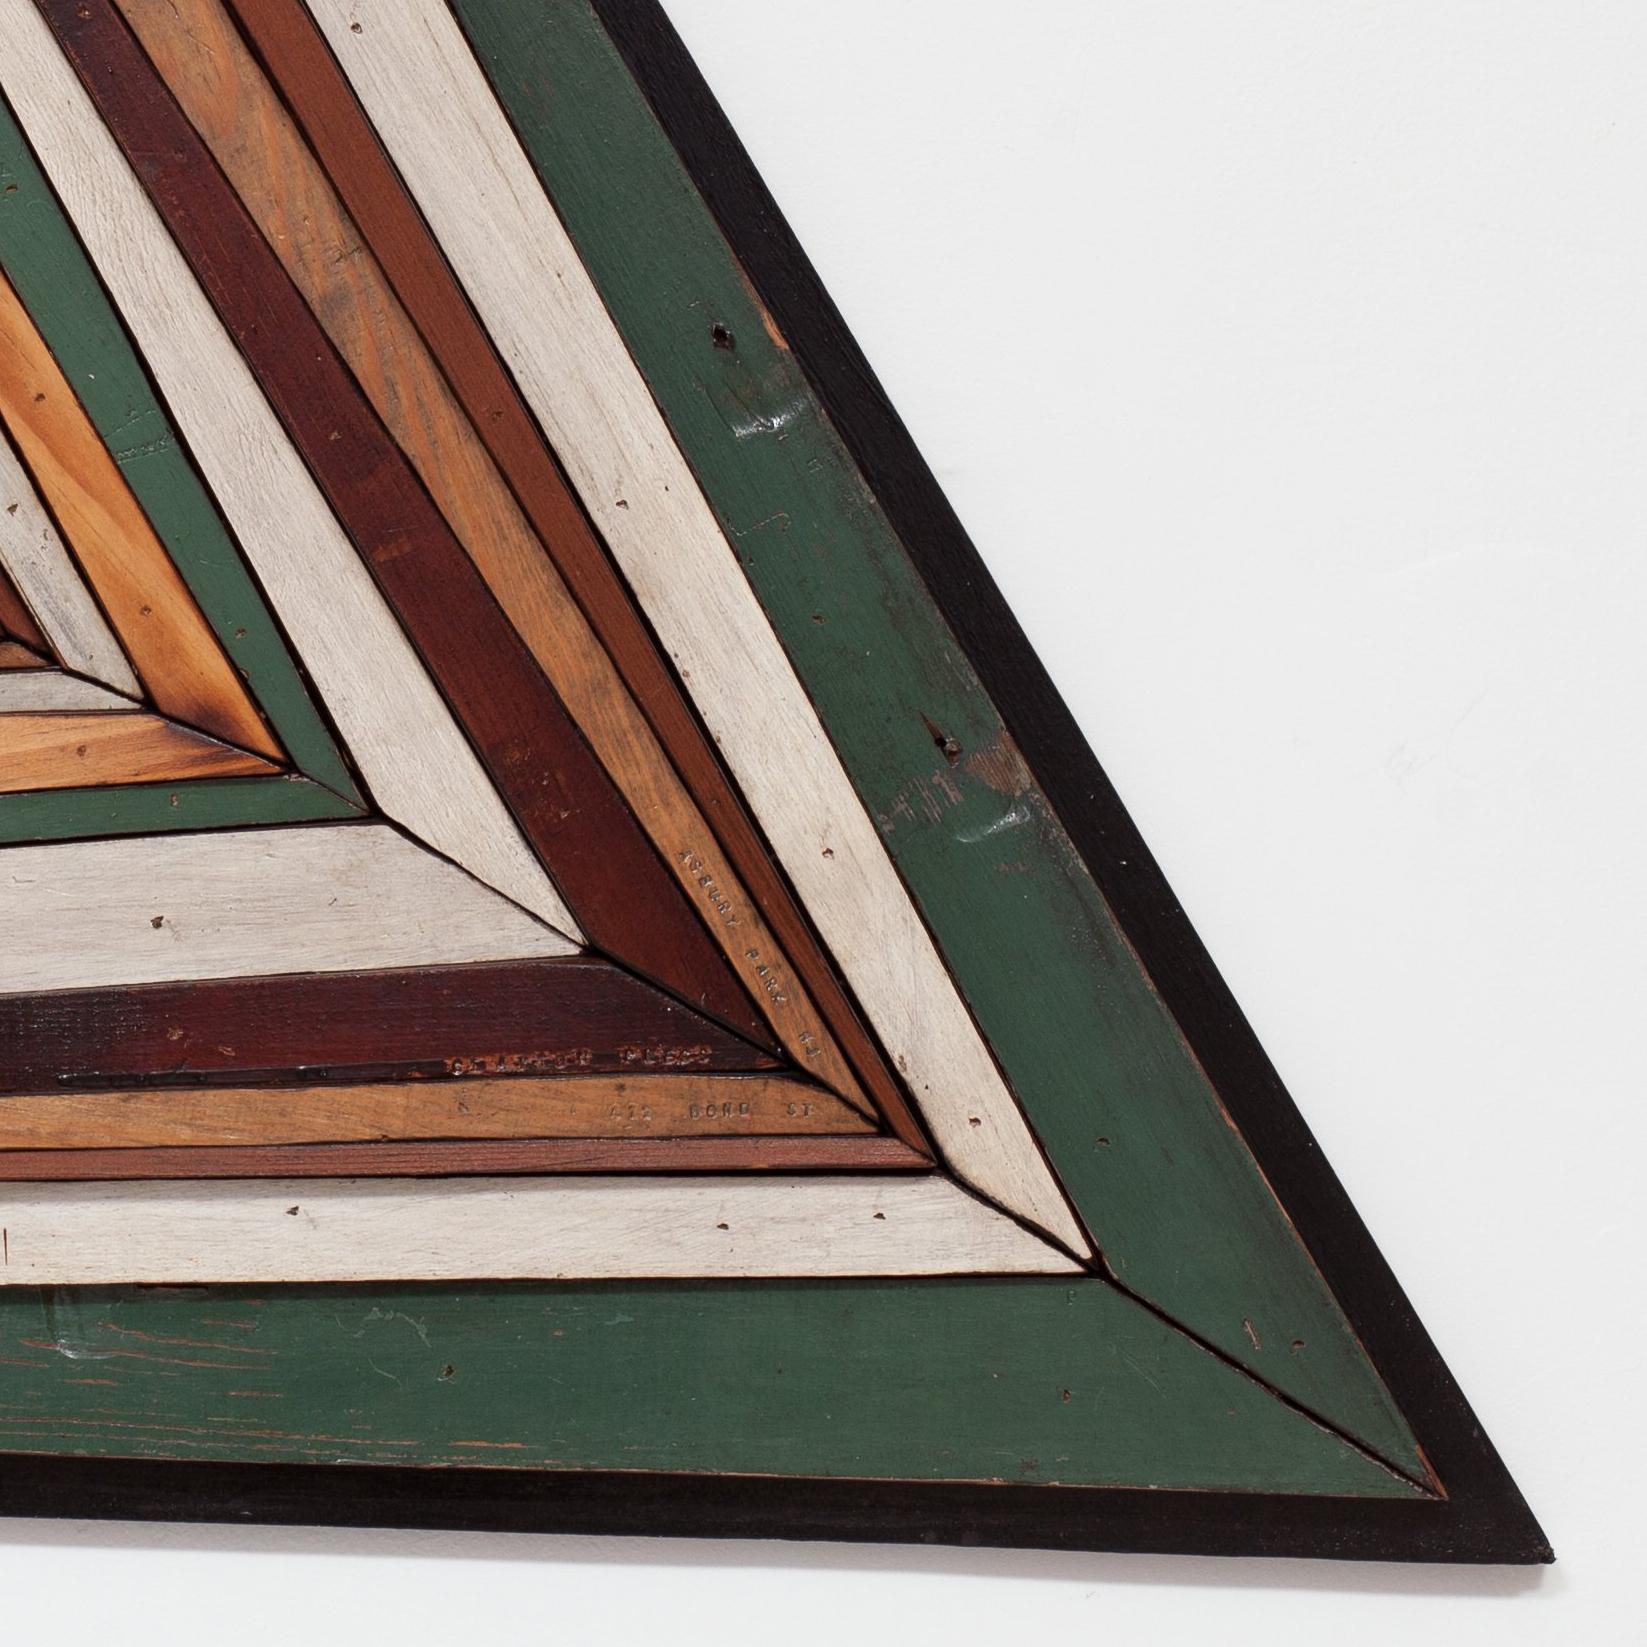 Pyramid Abstraction
Reclaimed wood and pigment on panel, 32 in. x 37 in.

Wildeman's work hangs on the walls of the Rockefeller family private offices, and is sought after by private collectors and commercial venues internationally. 
Wildeman is the